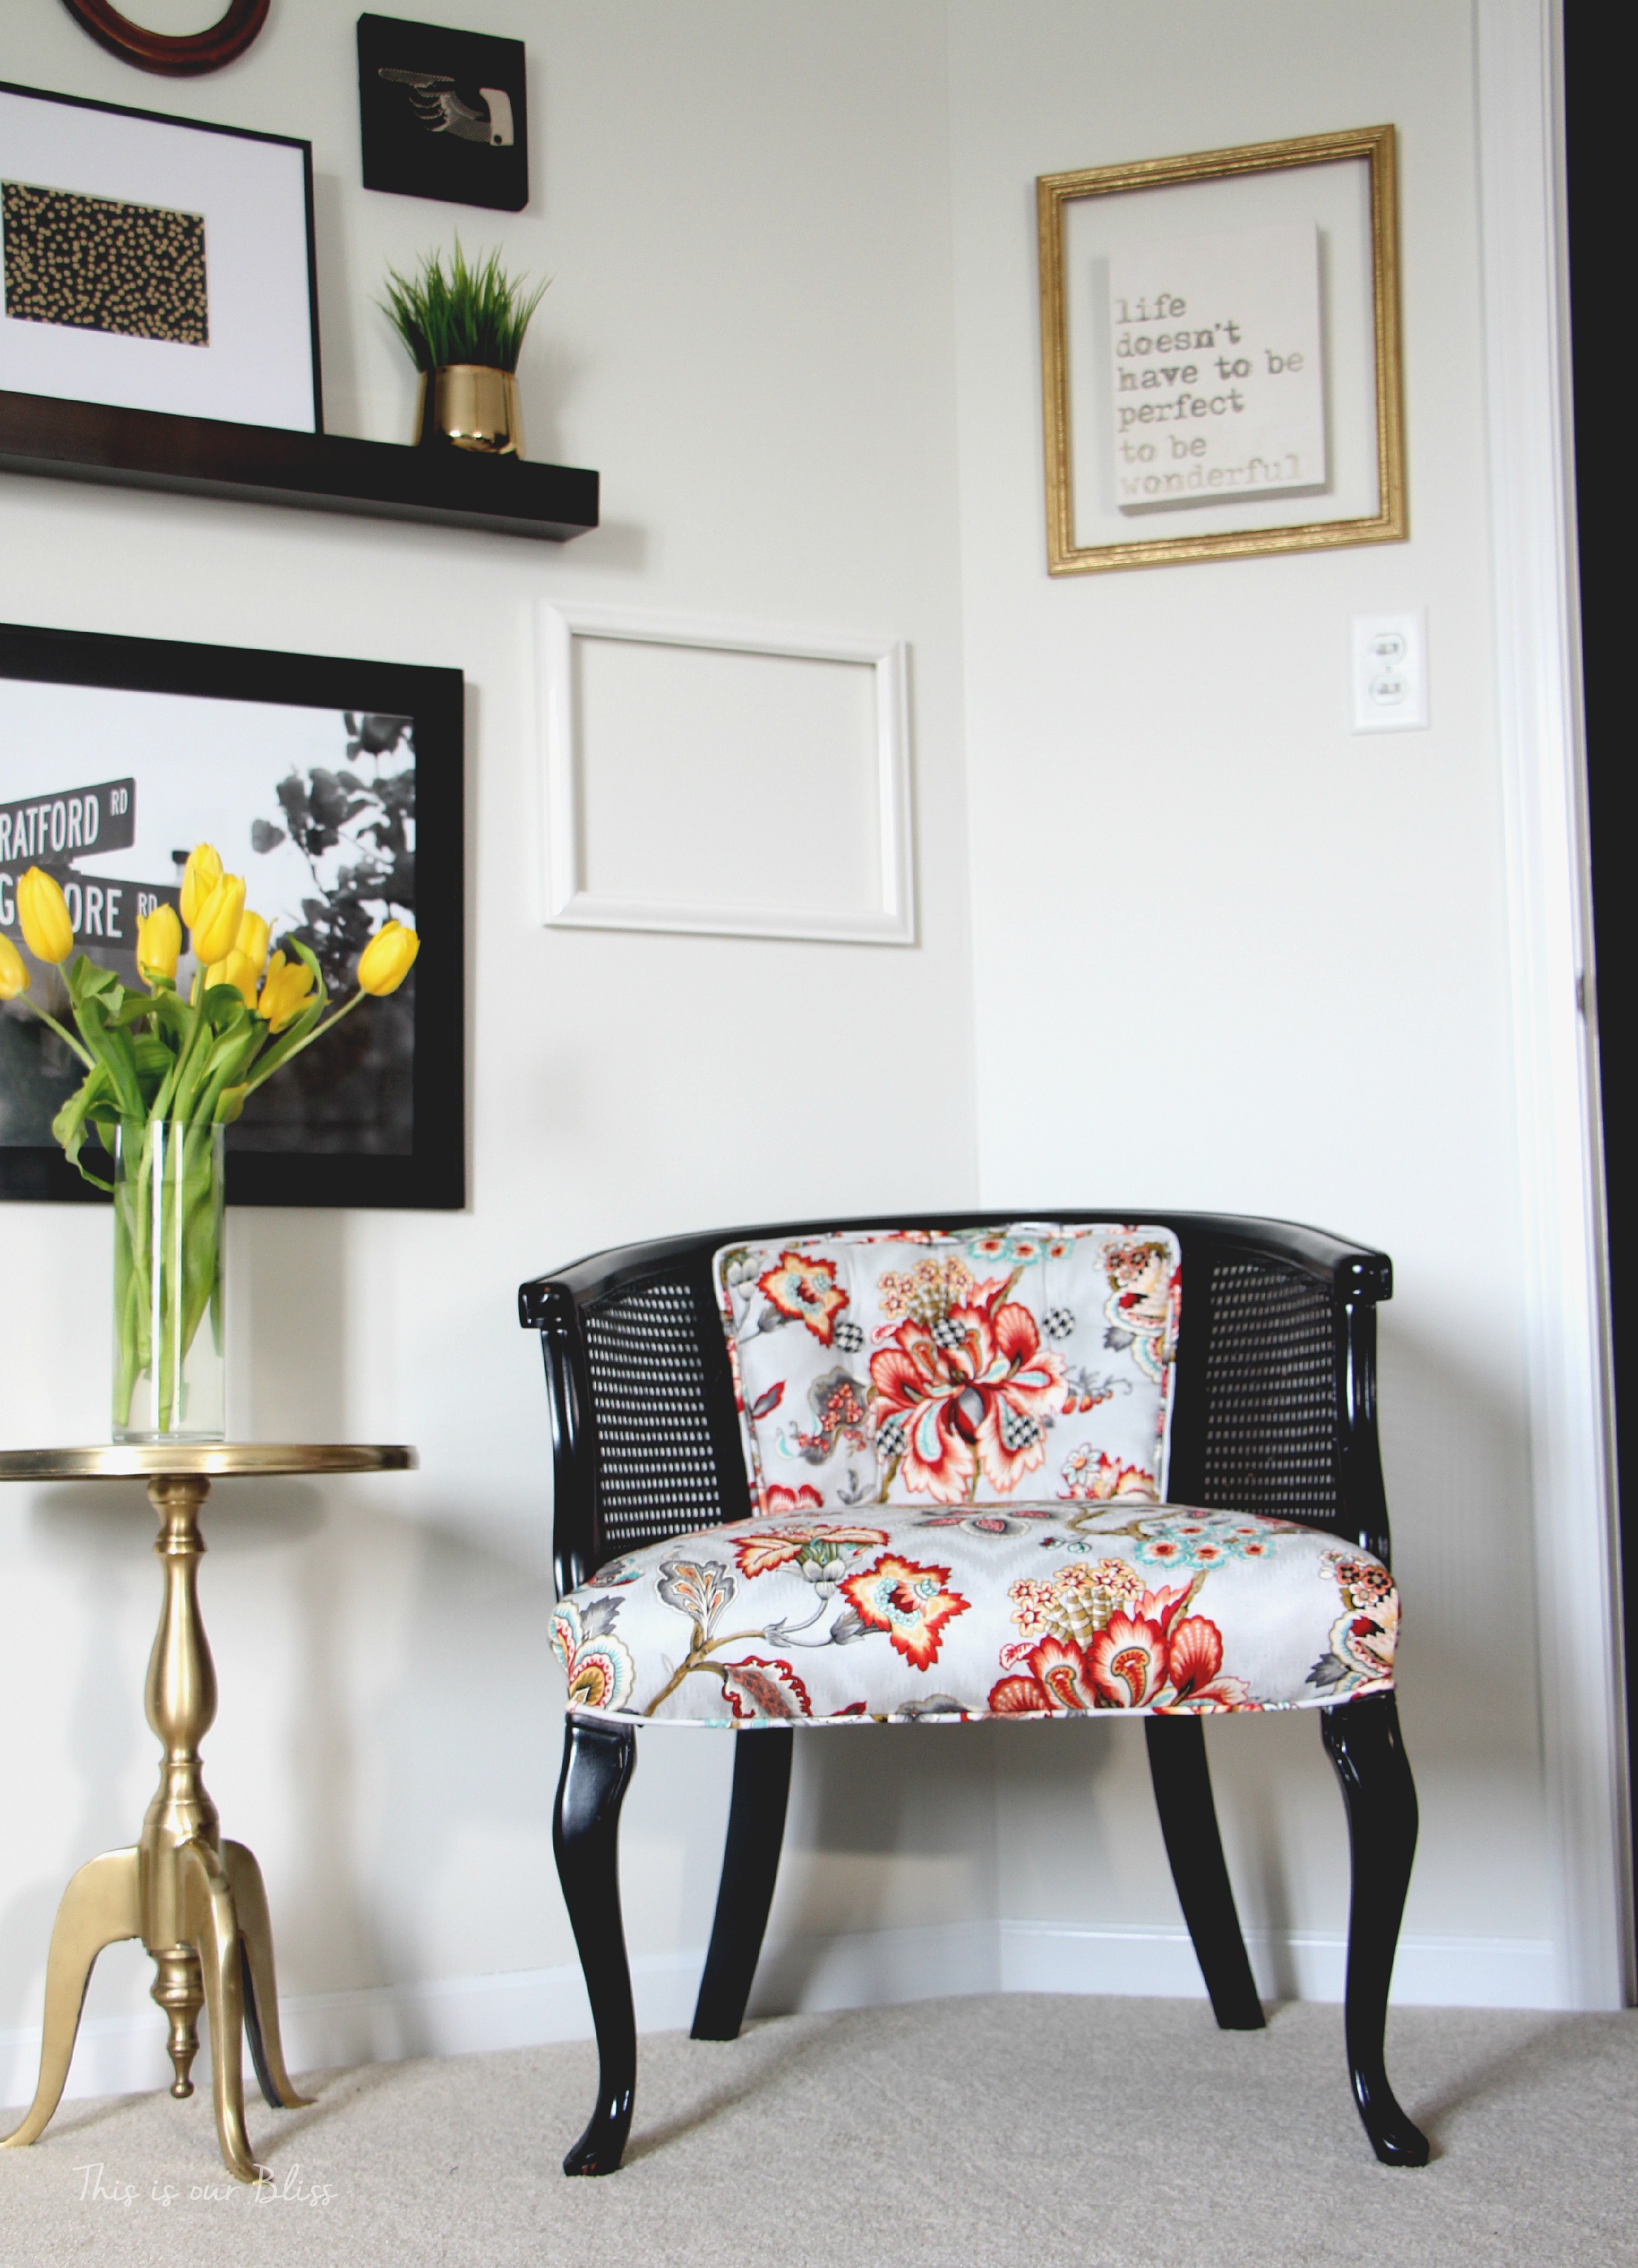 Guestroom revamp - Gallery wall - picture ledge - floating frame - DIY cane chair - Floral pattern - This is our Bliss